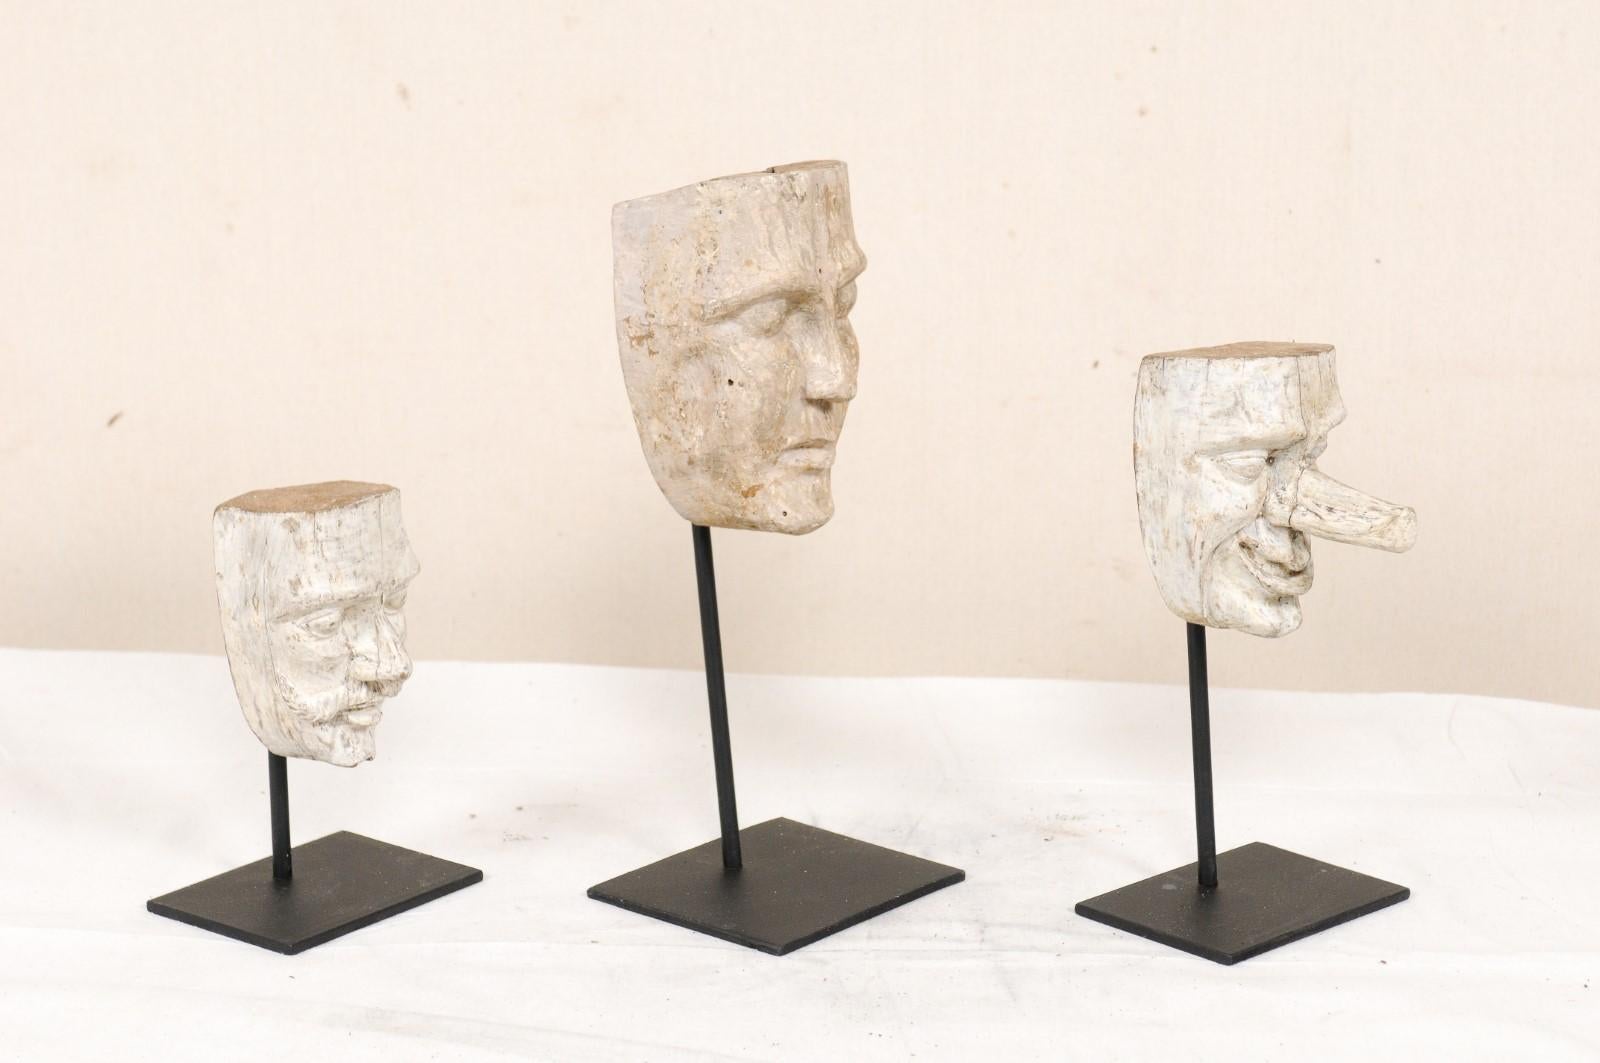 Hand-Carved Collection of Three Mid-20th Century Mask Molds from Ecuador on Custom Stands